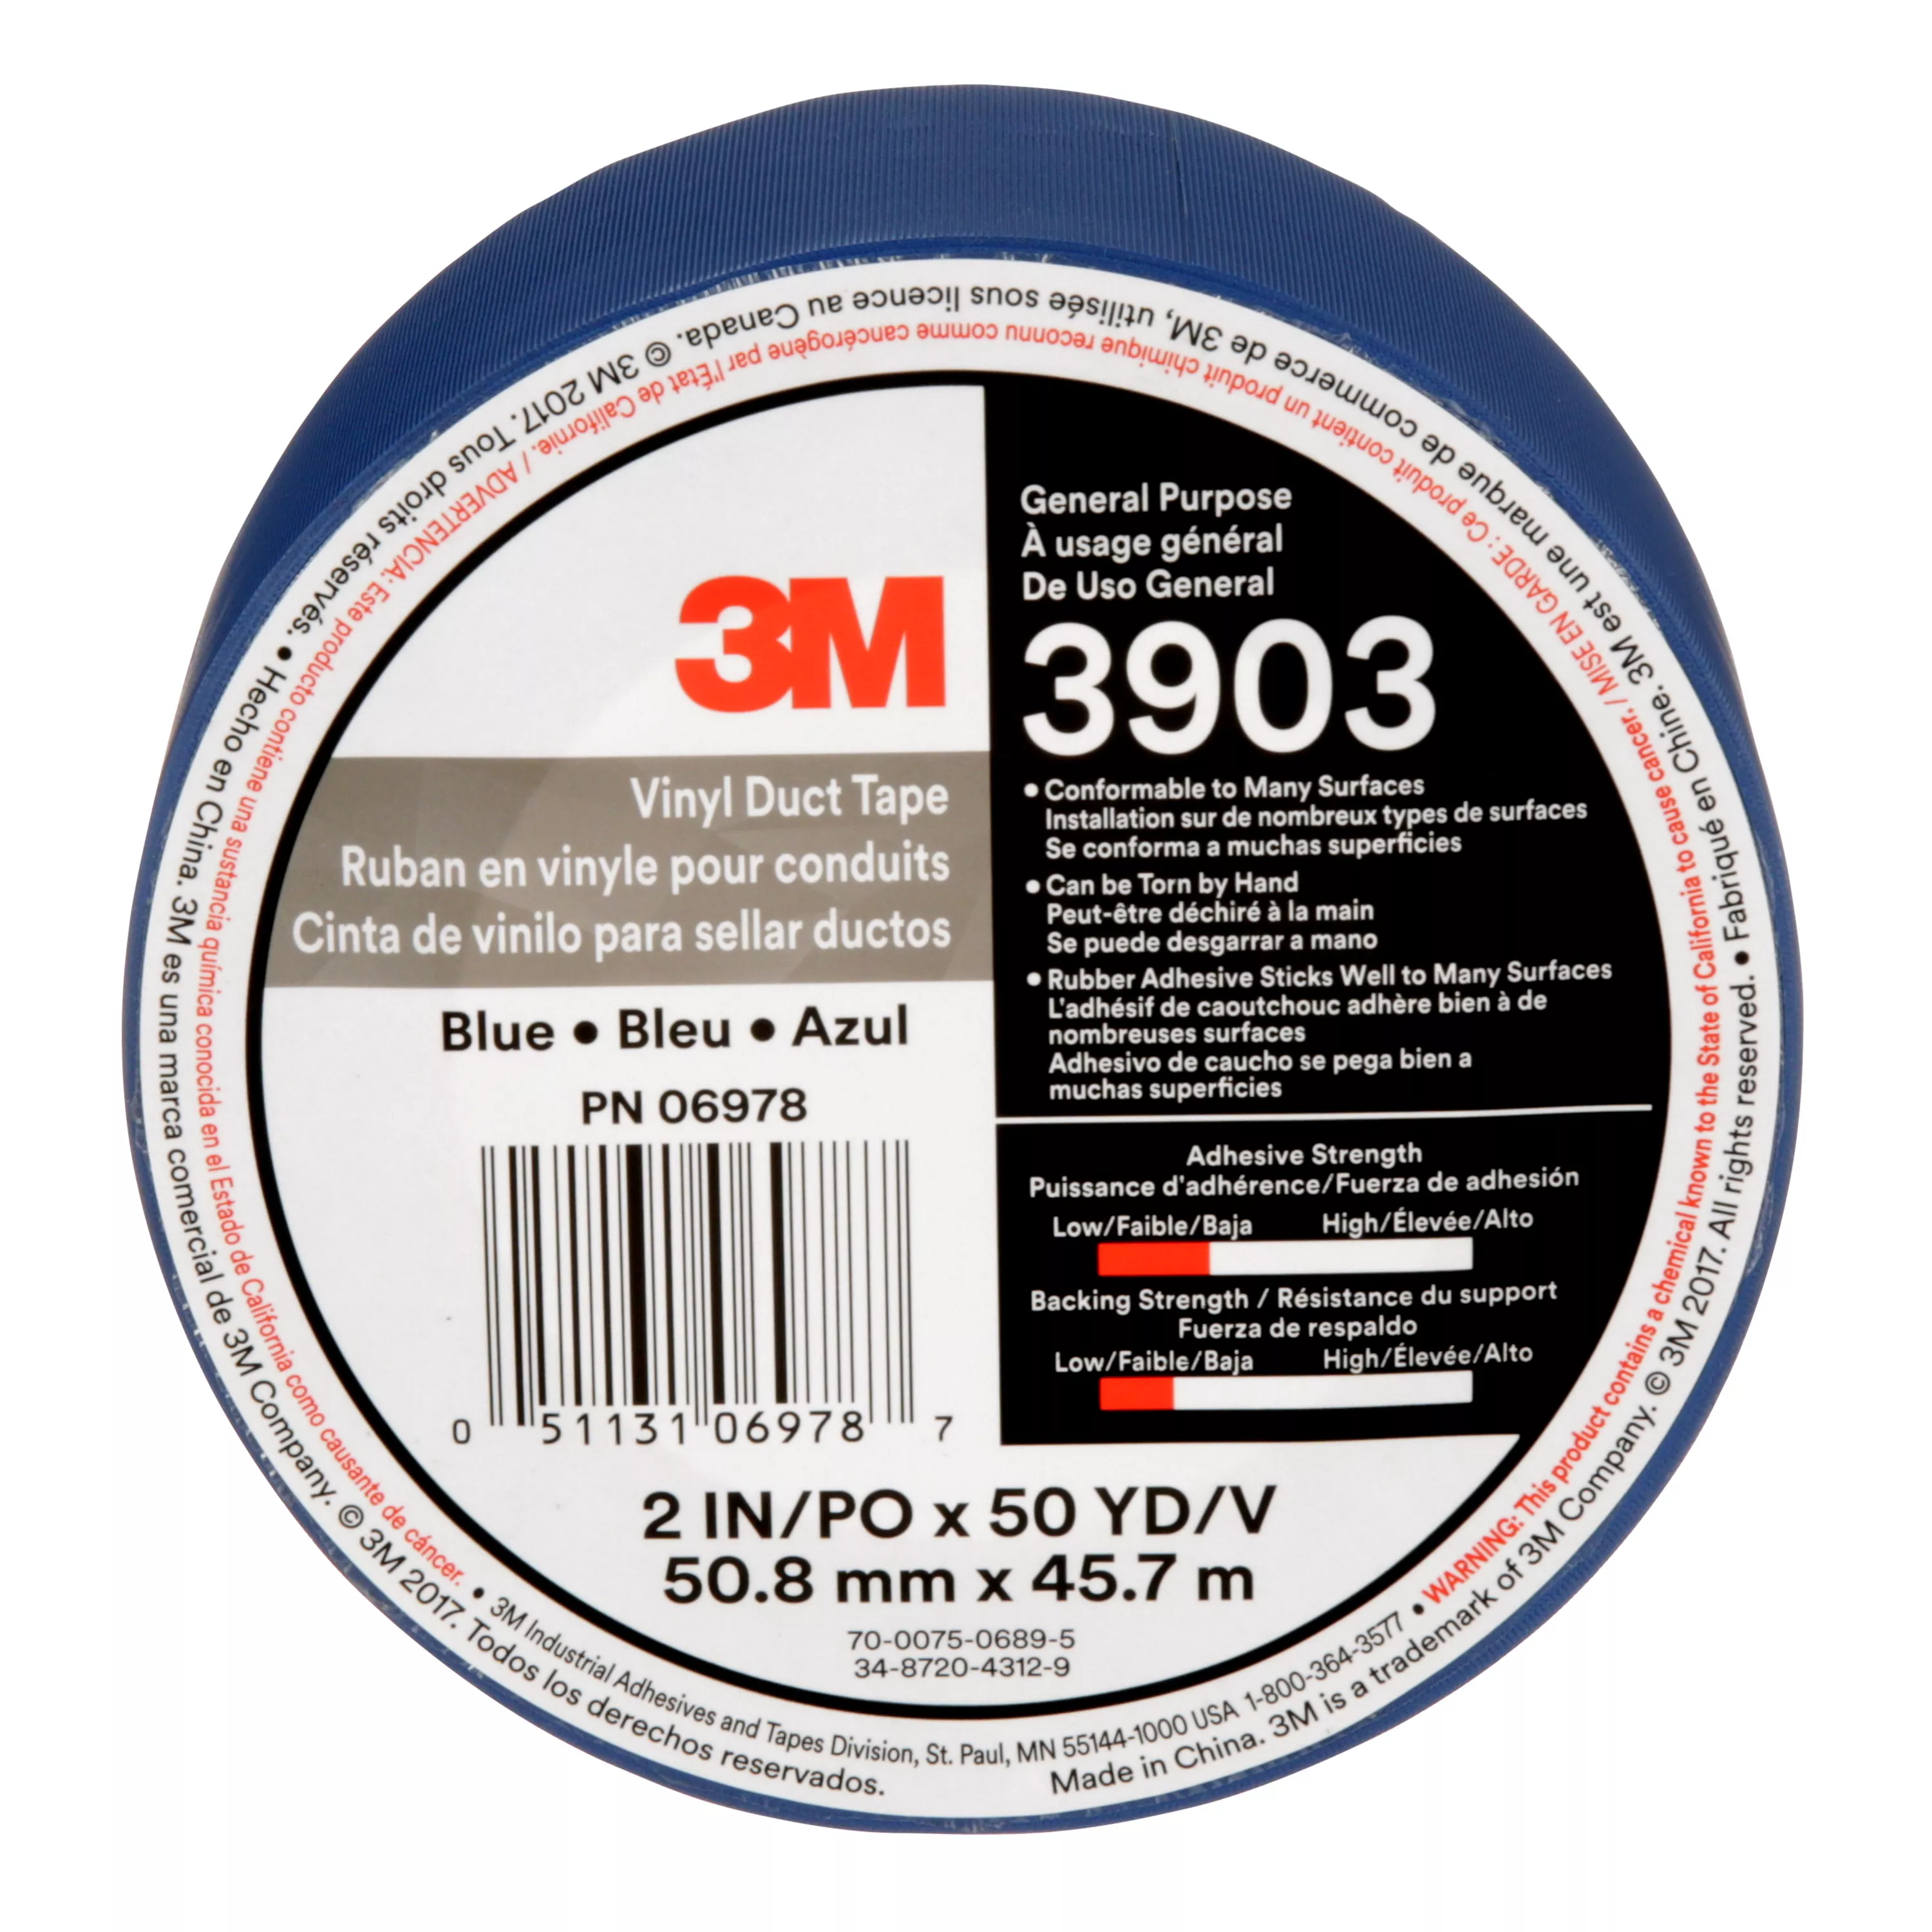 3M™ Vinyl Duct Tape 3903, Blue, 2 in x 50 yd, 6.5 mil, 24/Case,
Individually Wrapped Conveniently Packaged